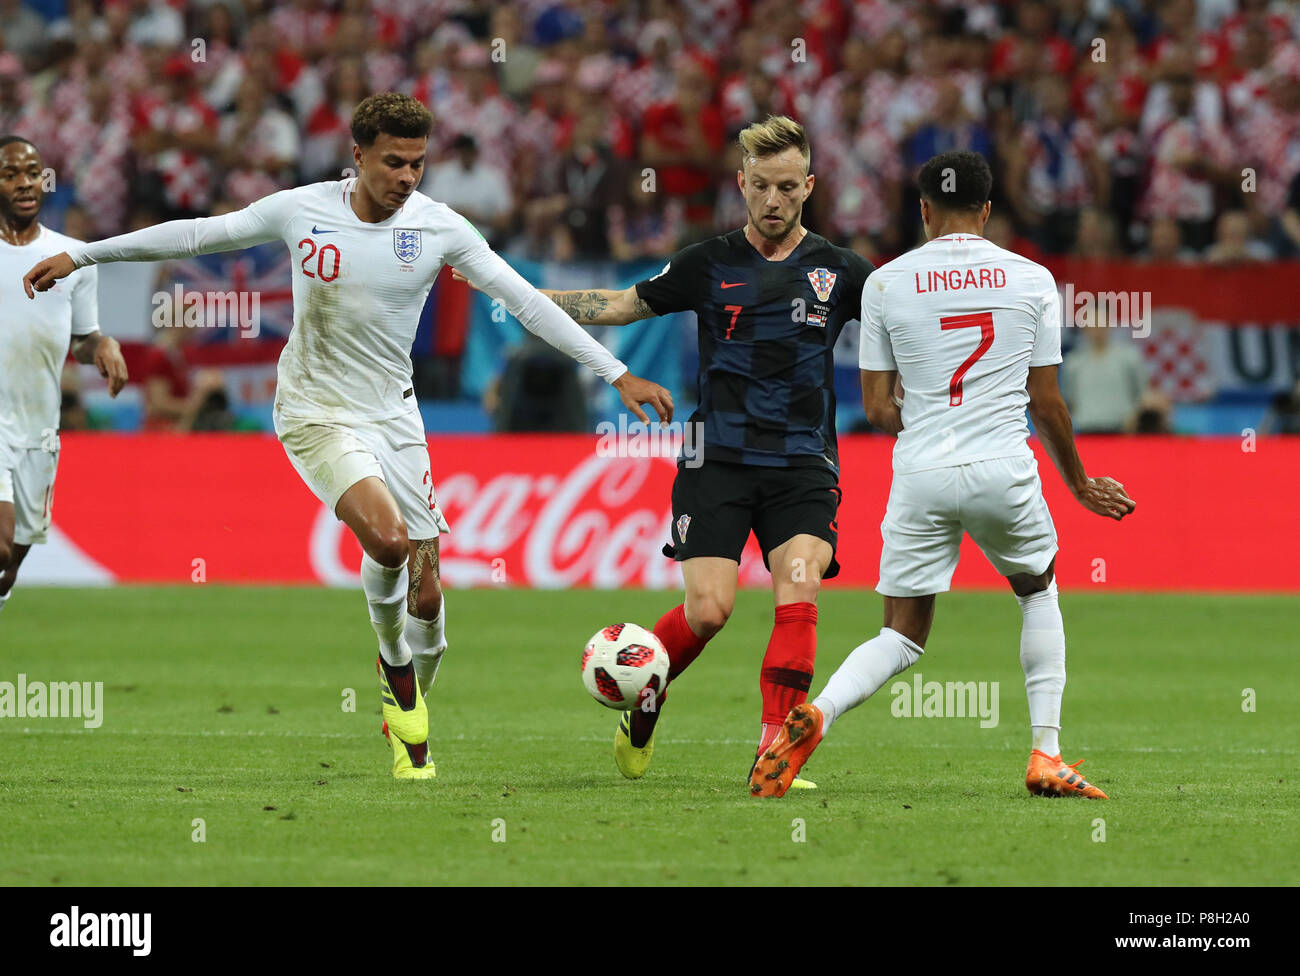 Moscow, Russia. 11th July, 2018. Ivan Rakitic (2nd R) of Croatia vies with Jesse Lingard (1st R) and Dele Alli (2nd L) of England during the 2018 FIFA World Cup semi-final match between England and Croatia in Moscow, Russia, July 11, 2018. Credit: Yang Lei/Xinhua/Alamy Live News Stock Photo